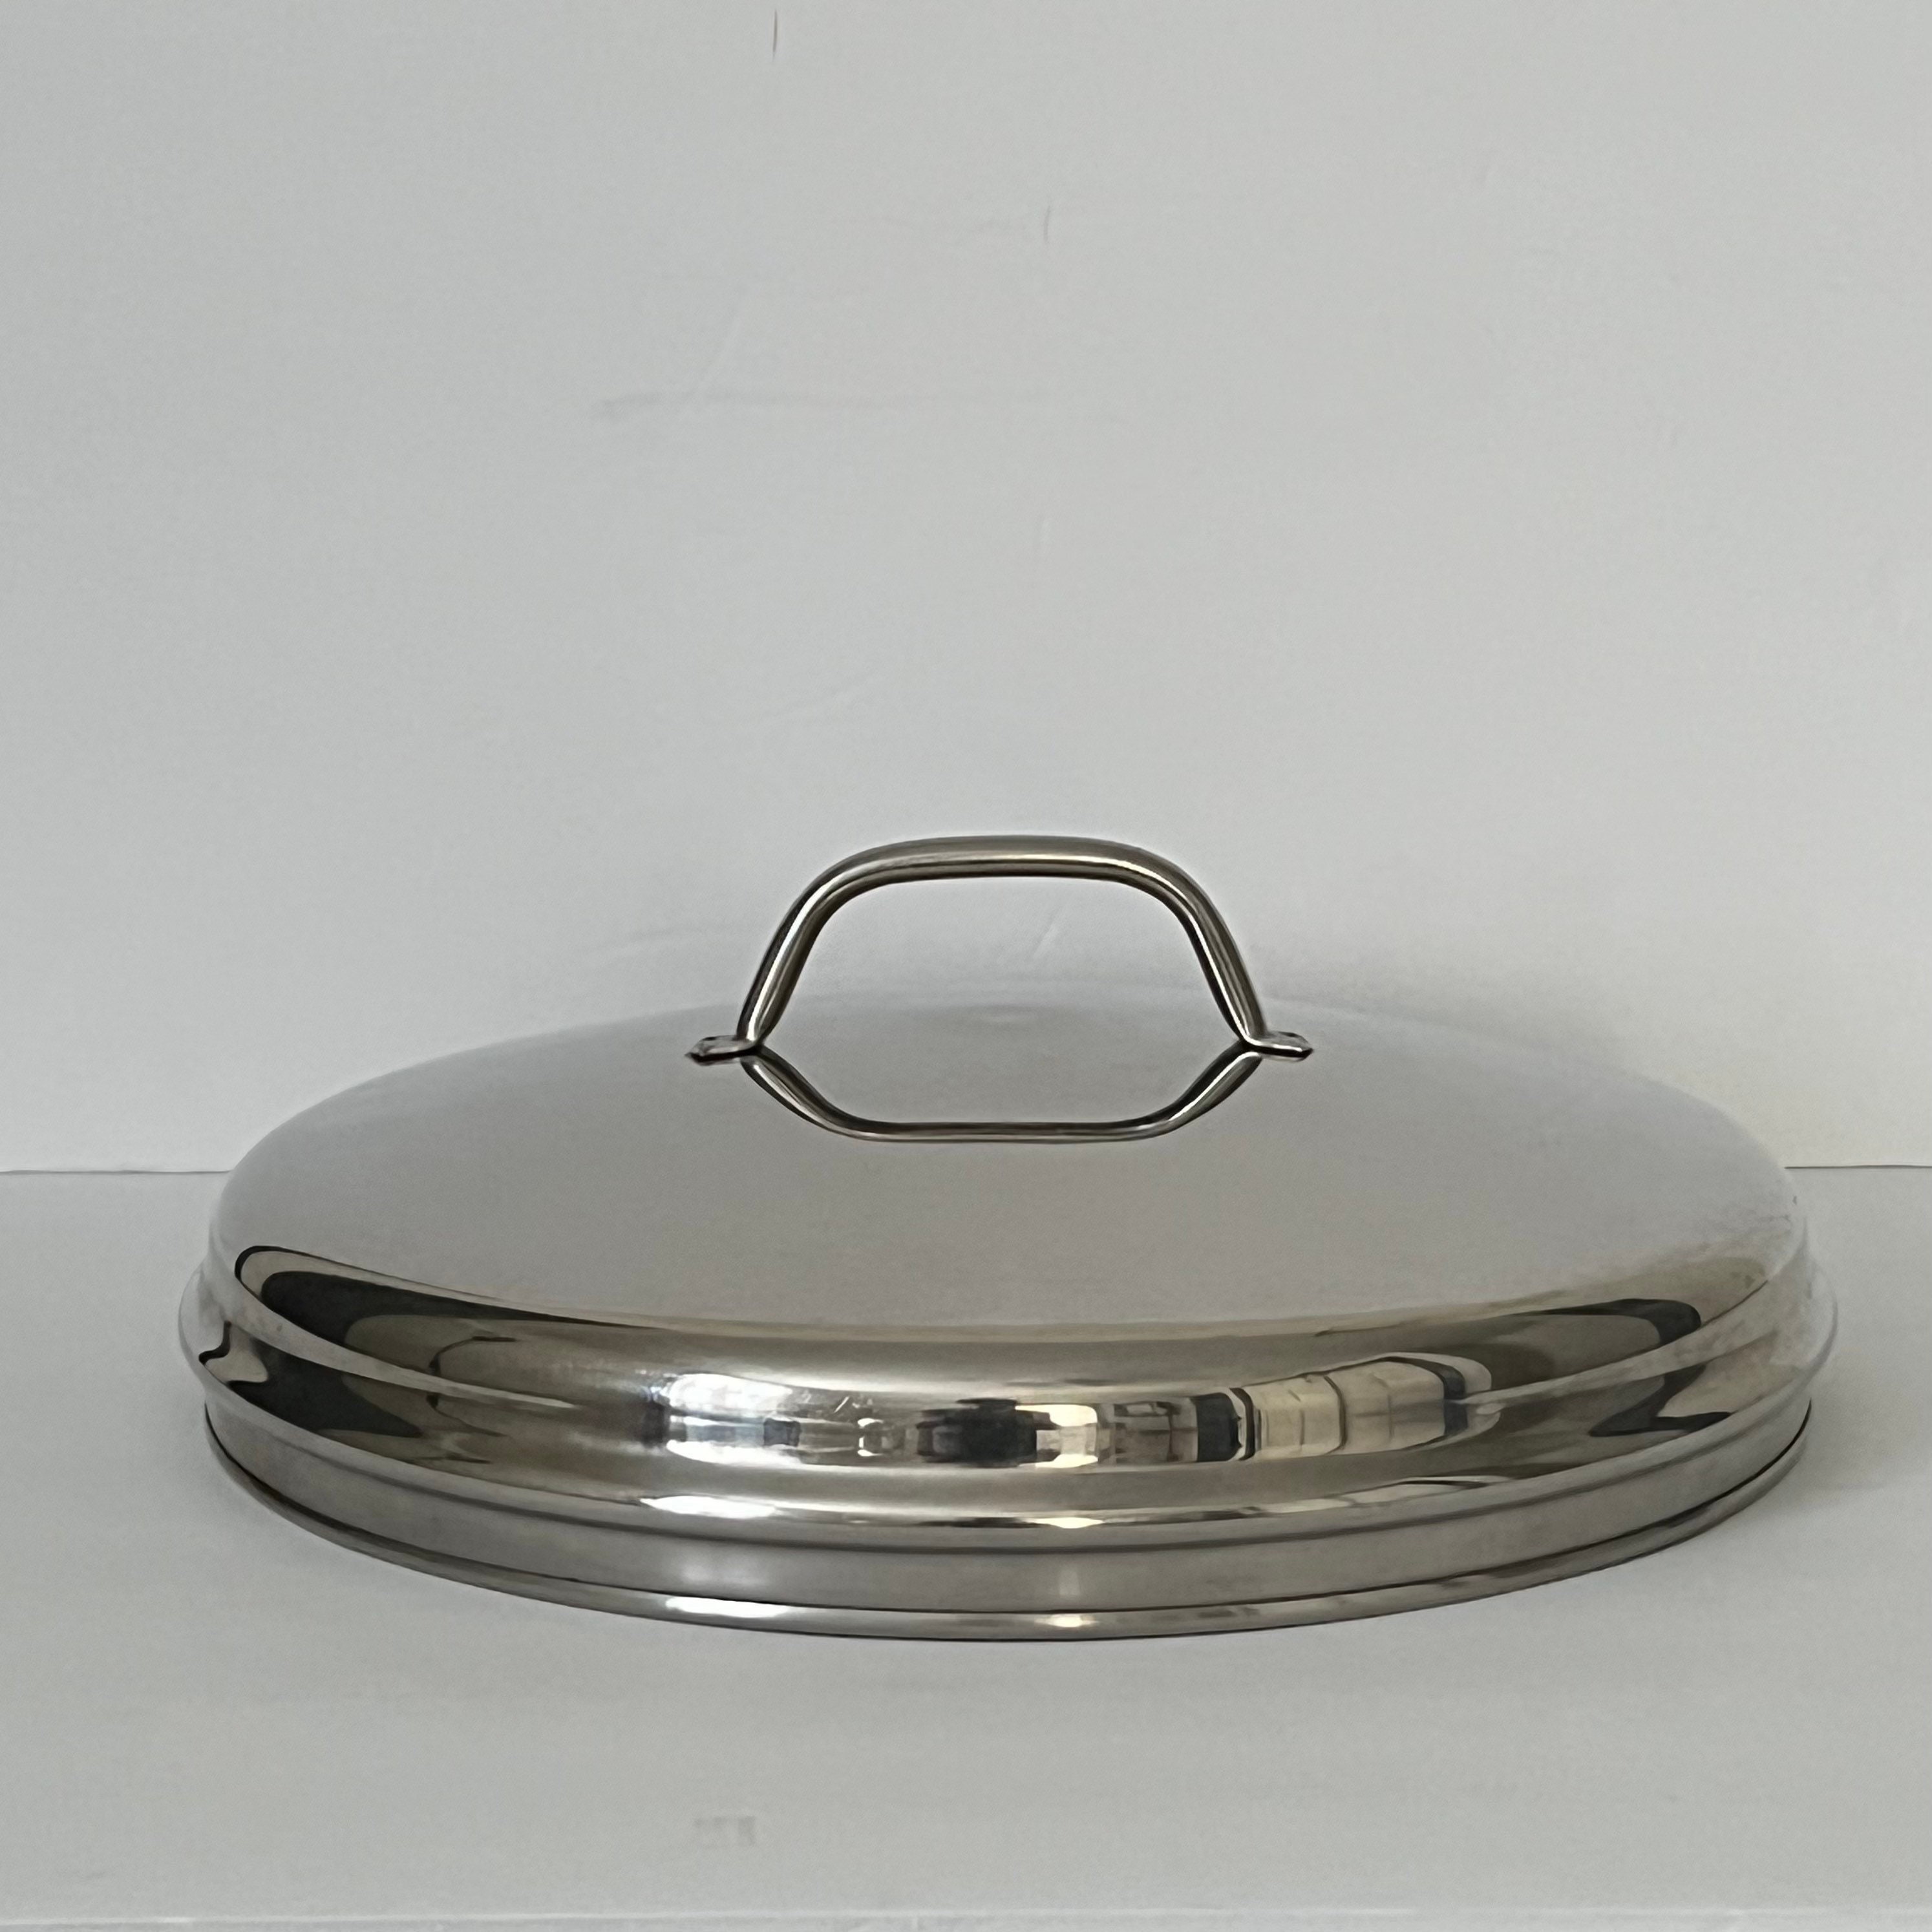 FARBERWARE REPLACEMENT LIDS Stainless Steel 5 6 7 8 9 10 Beehive Dome  MORE $10.68 - PicClick